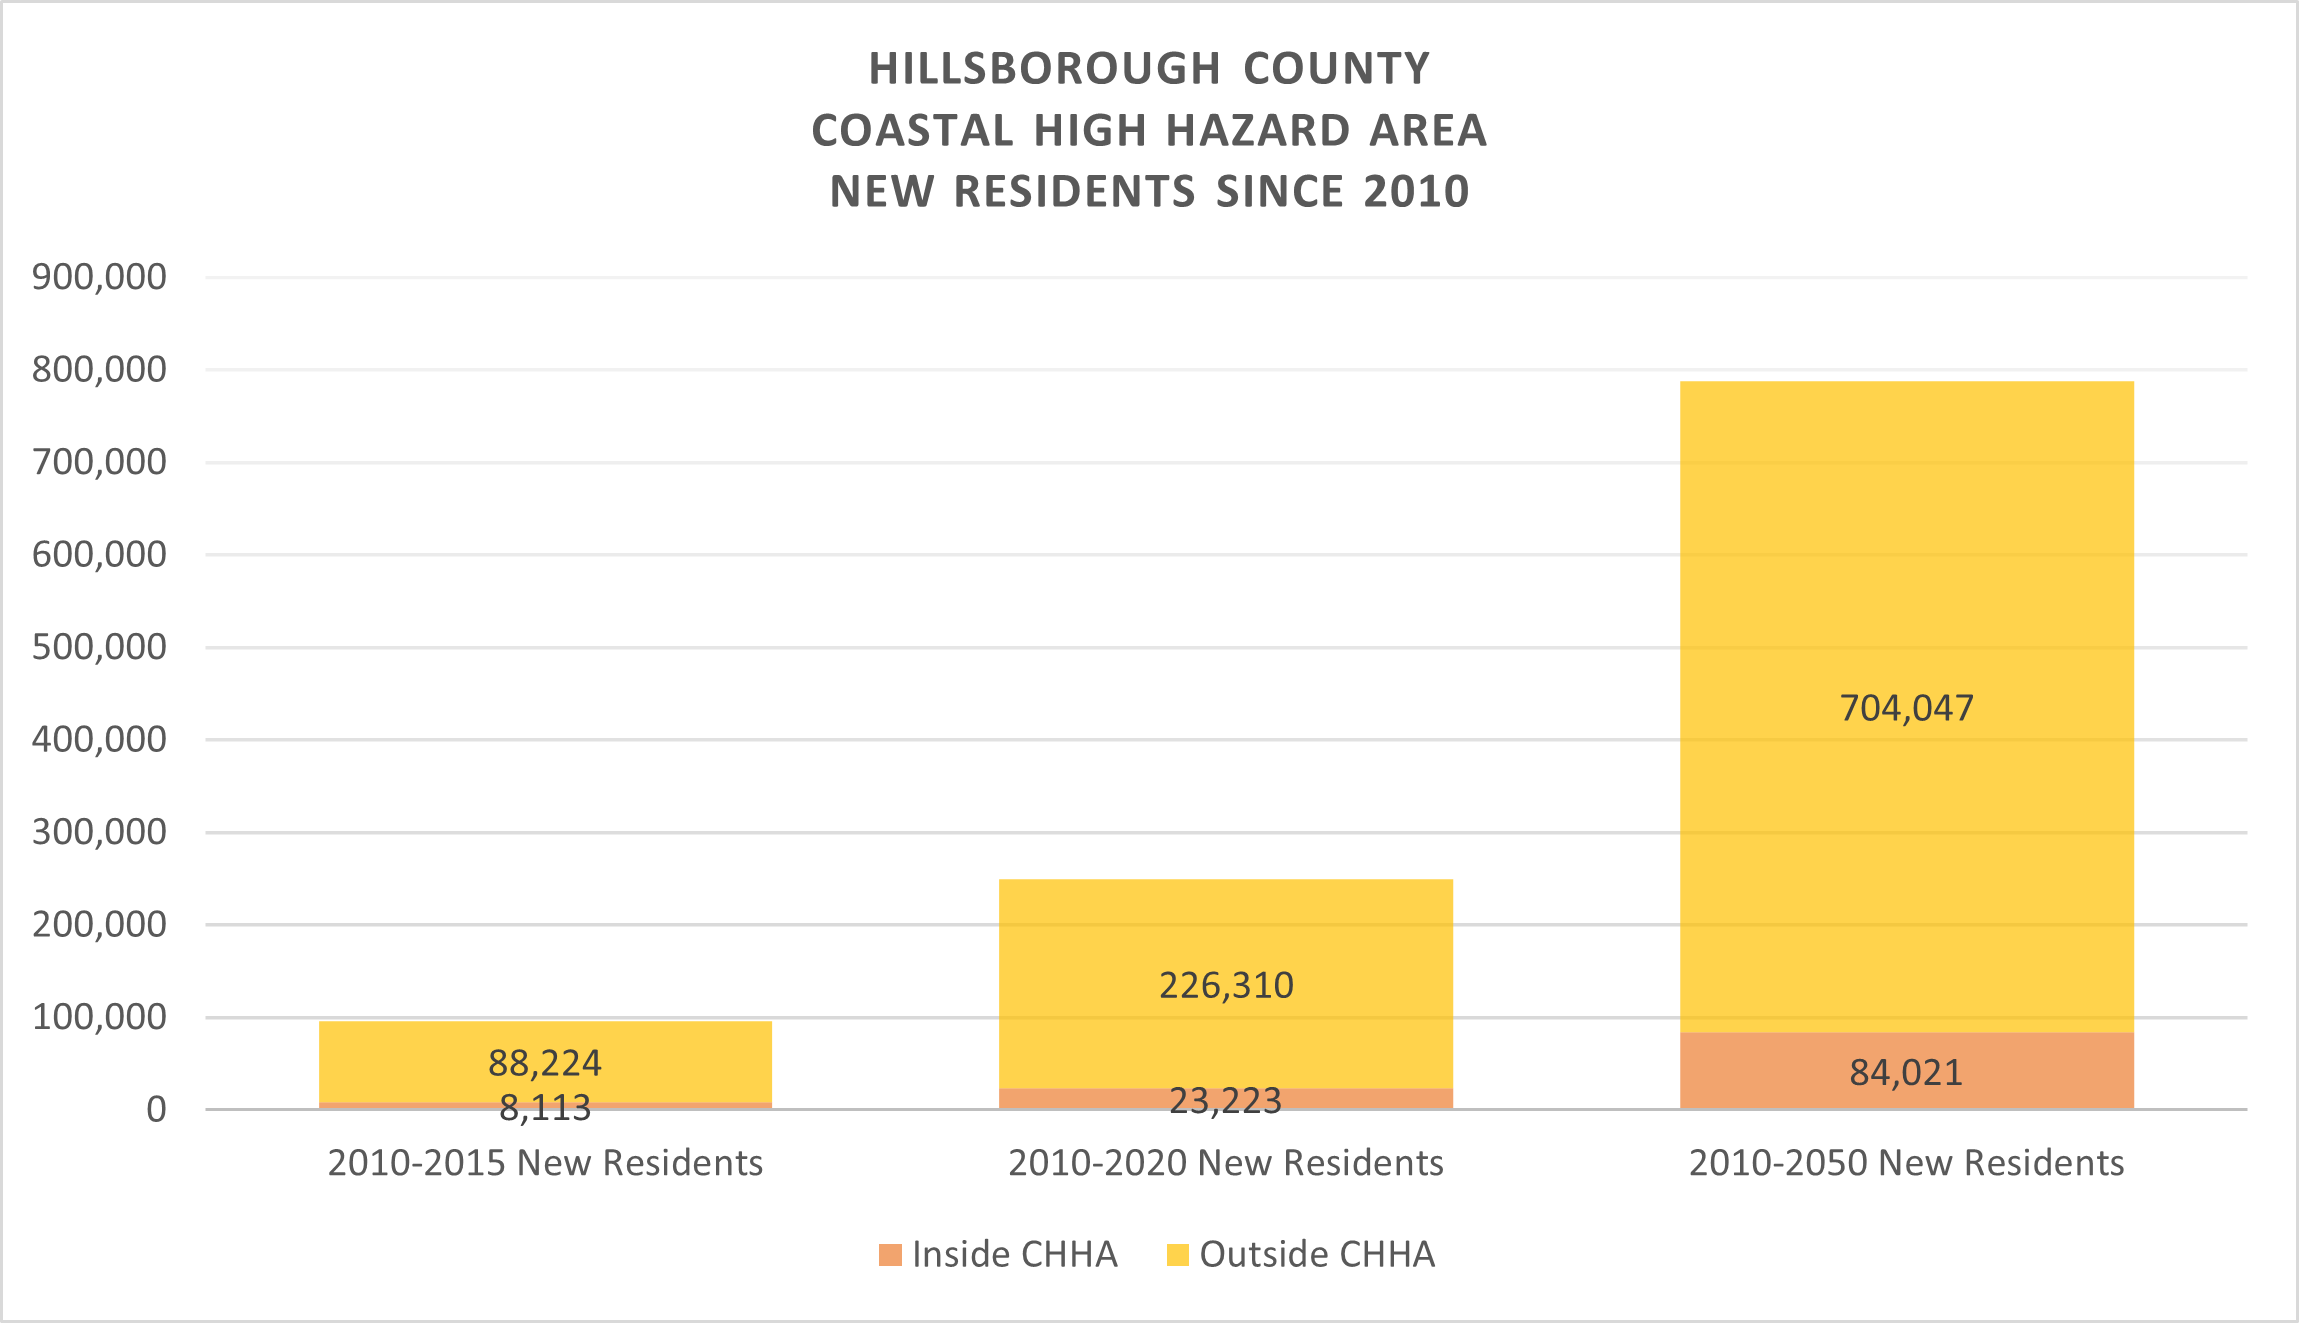 This chart shows Hillsborough County's new residents inside and outside the CHHA. From 2010 to 2020, 23,223 new residents moved inside the CHHA and 226,310 new residents moved outside CHHA. From 2010 to 2050, 84,021 new residents are expected to move inside the CHHA and 704,047 new residents are expected to move outside the CHHA.